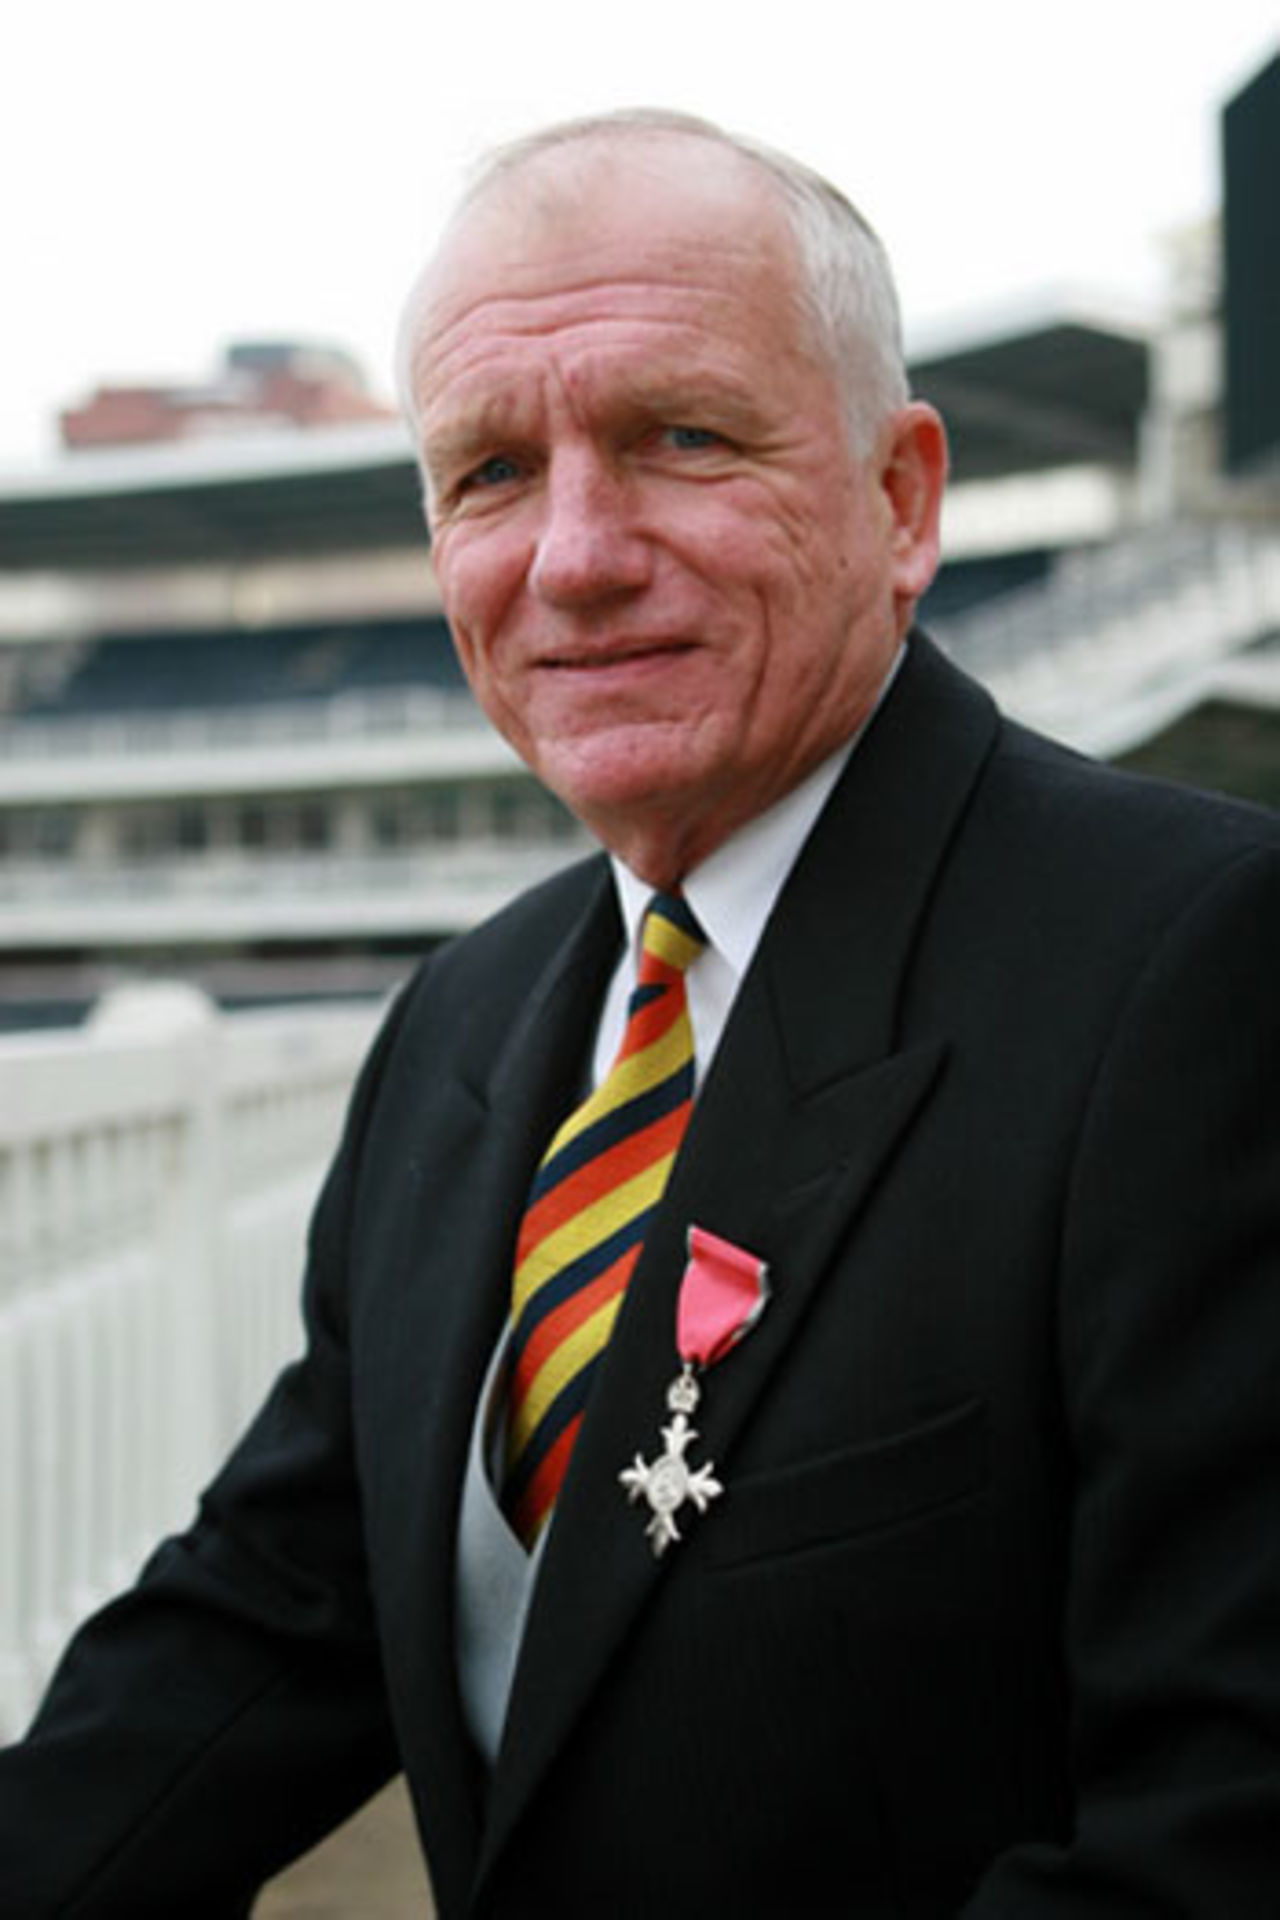 Clive Radley proudly displays his MBE, Lord's, February 19, 2008